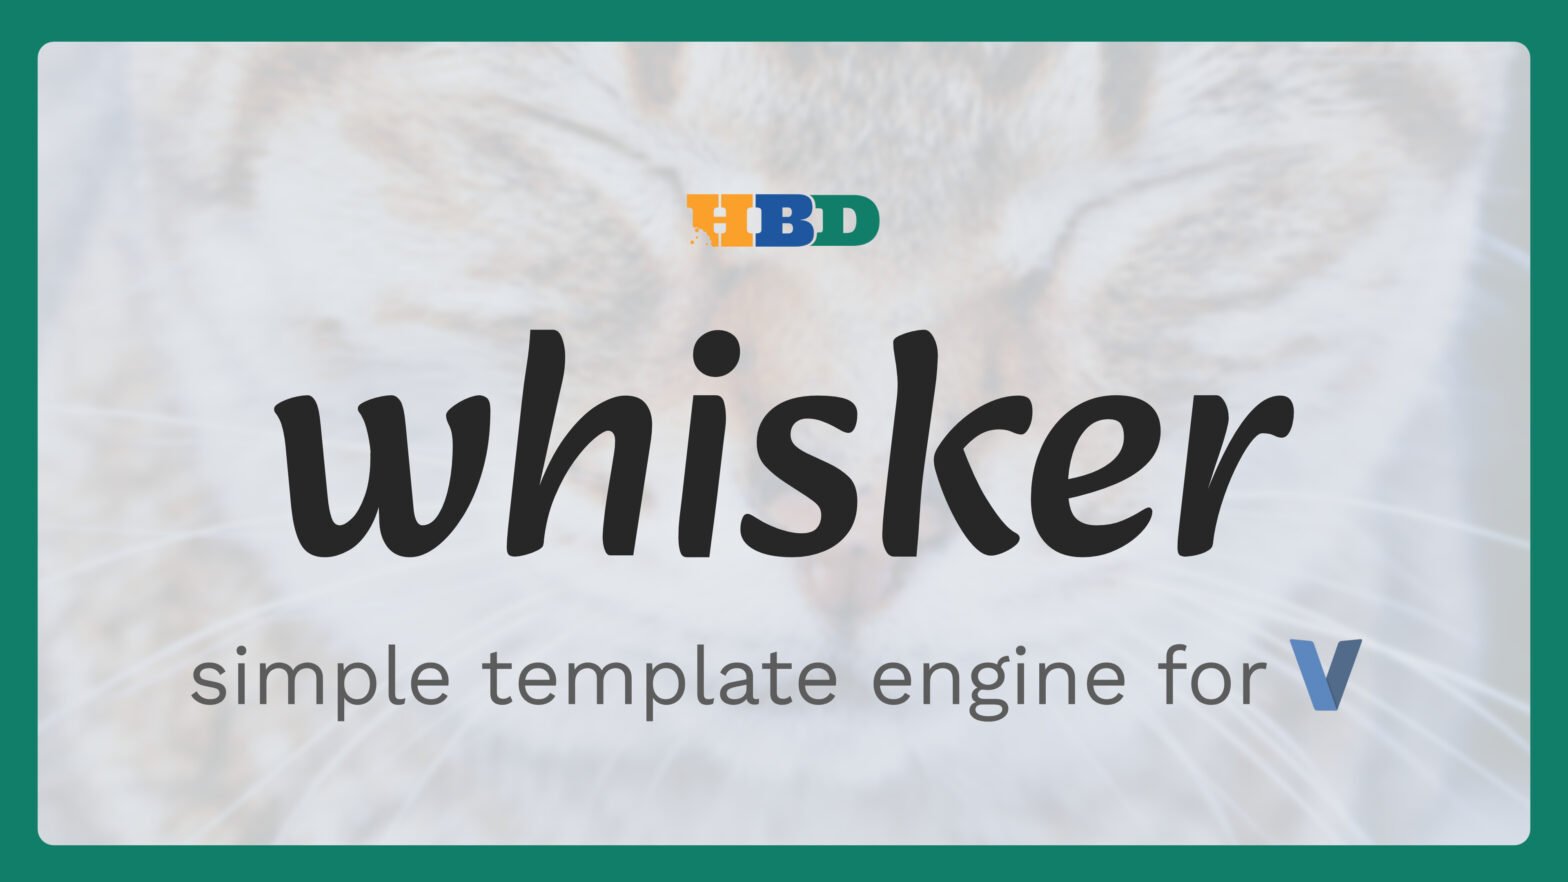 whisker - simple template engine for V. In the background, there is an image of a cat with its eyes closed, out of focus.